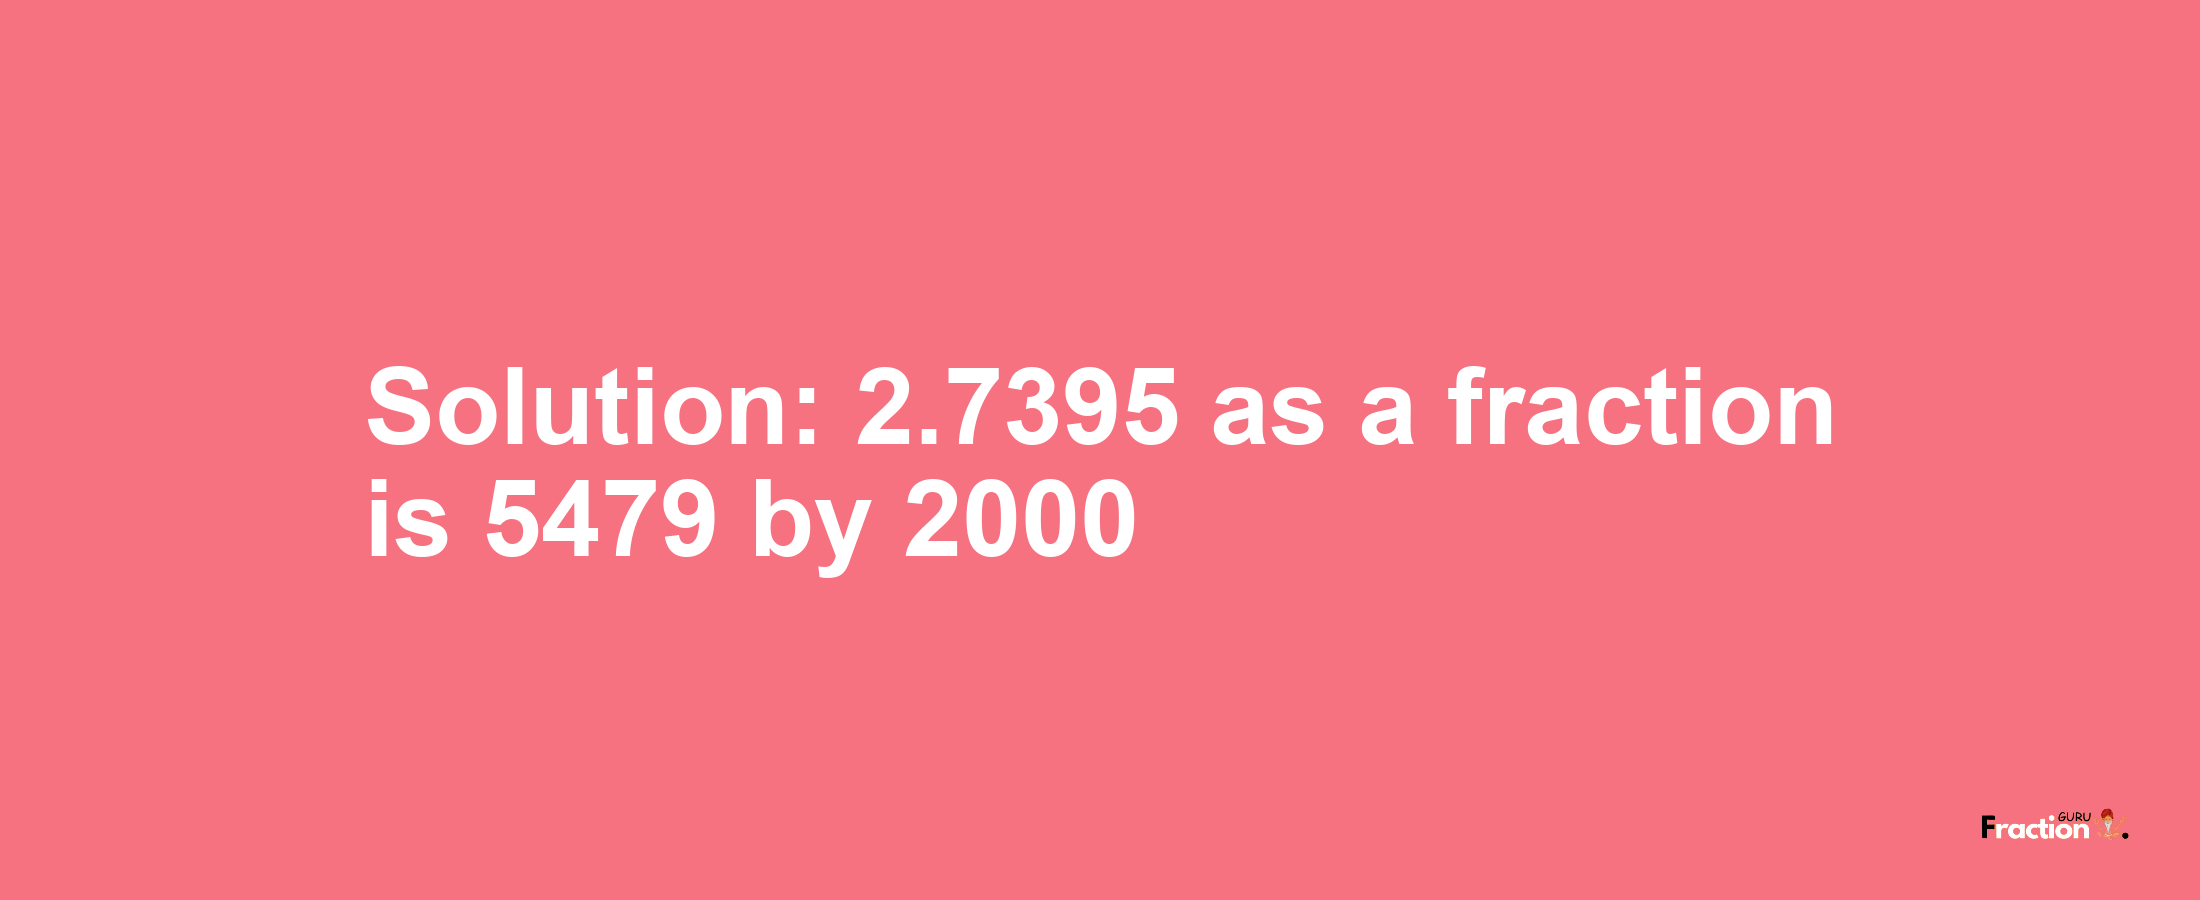 Solution:2.7395 as a fraction is 5479/2000